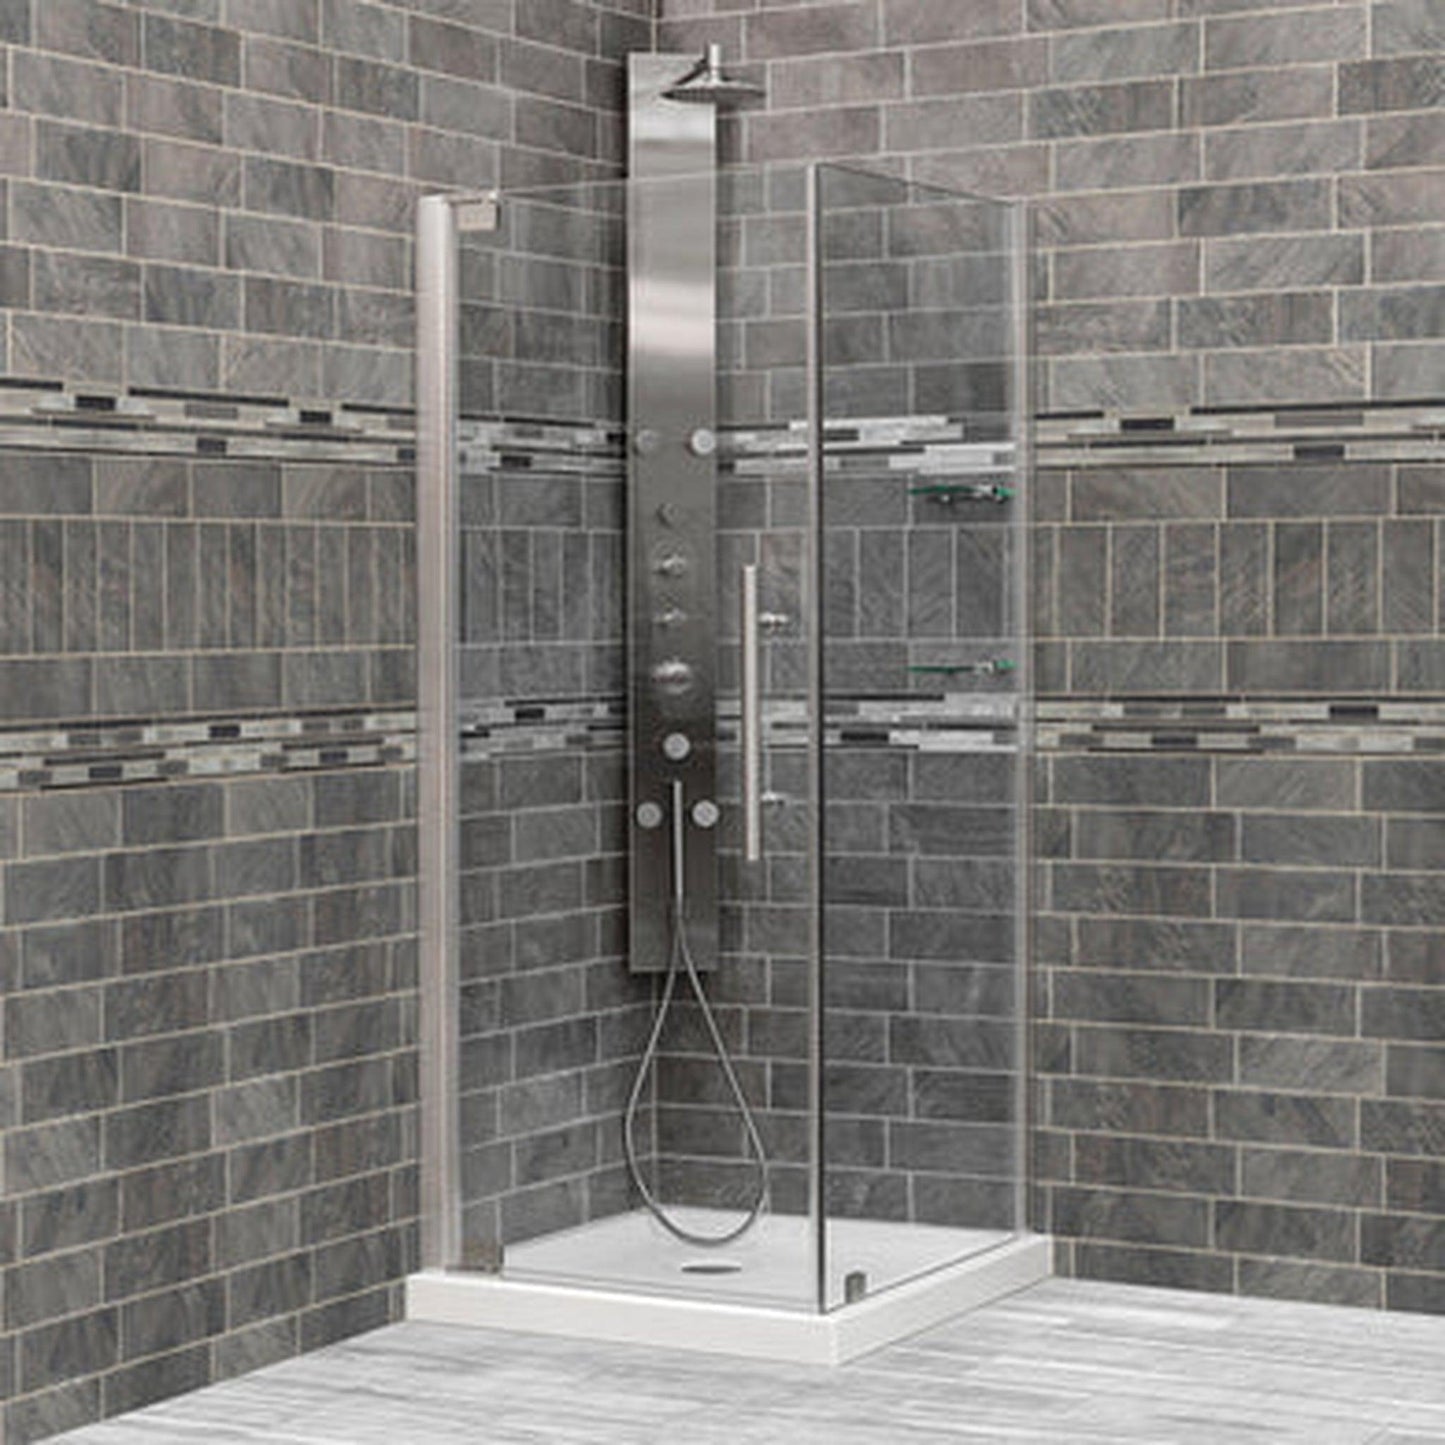 LessCare Ultra-G 34 3/8-35" x 72" x 34-35" Brushed Nickel Swing-Out Shower Enclosure